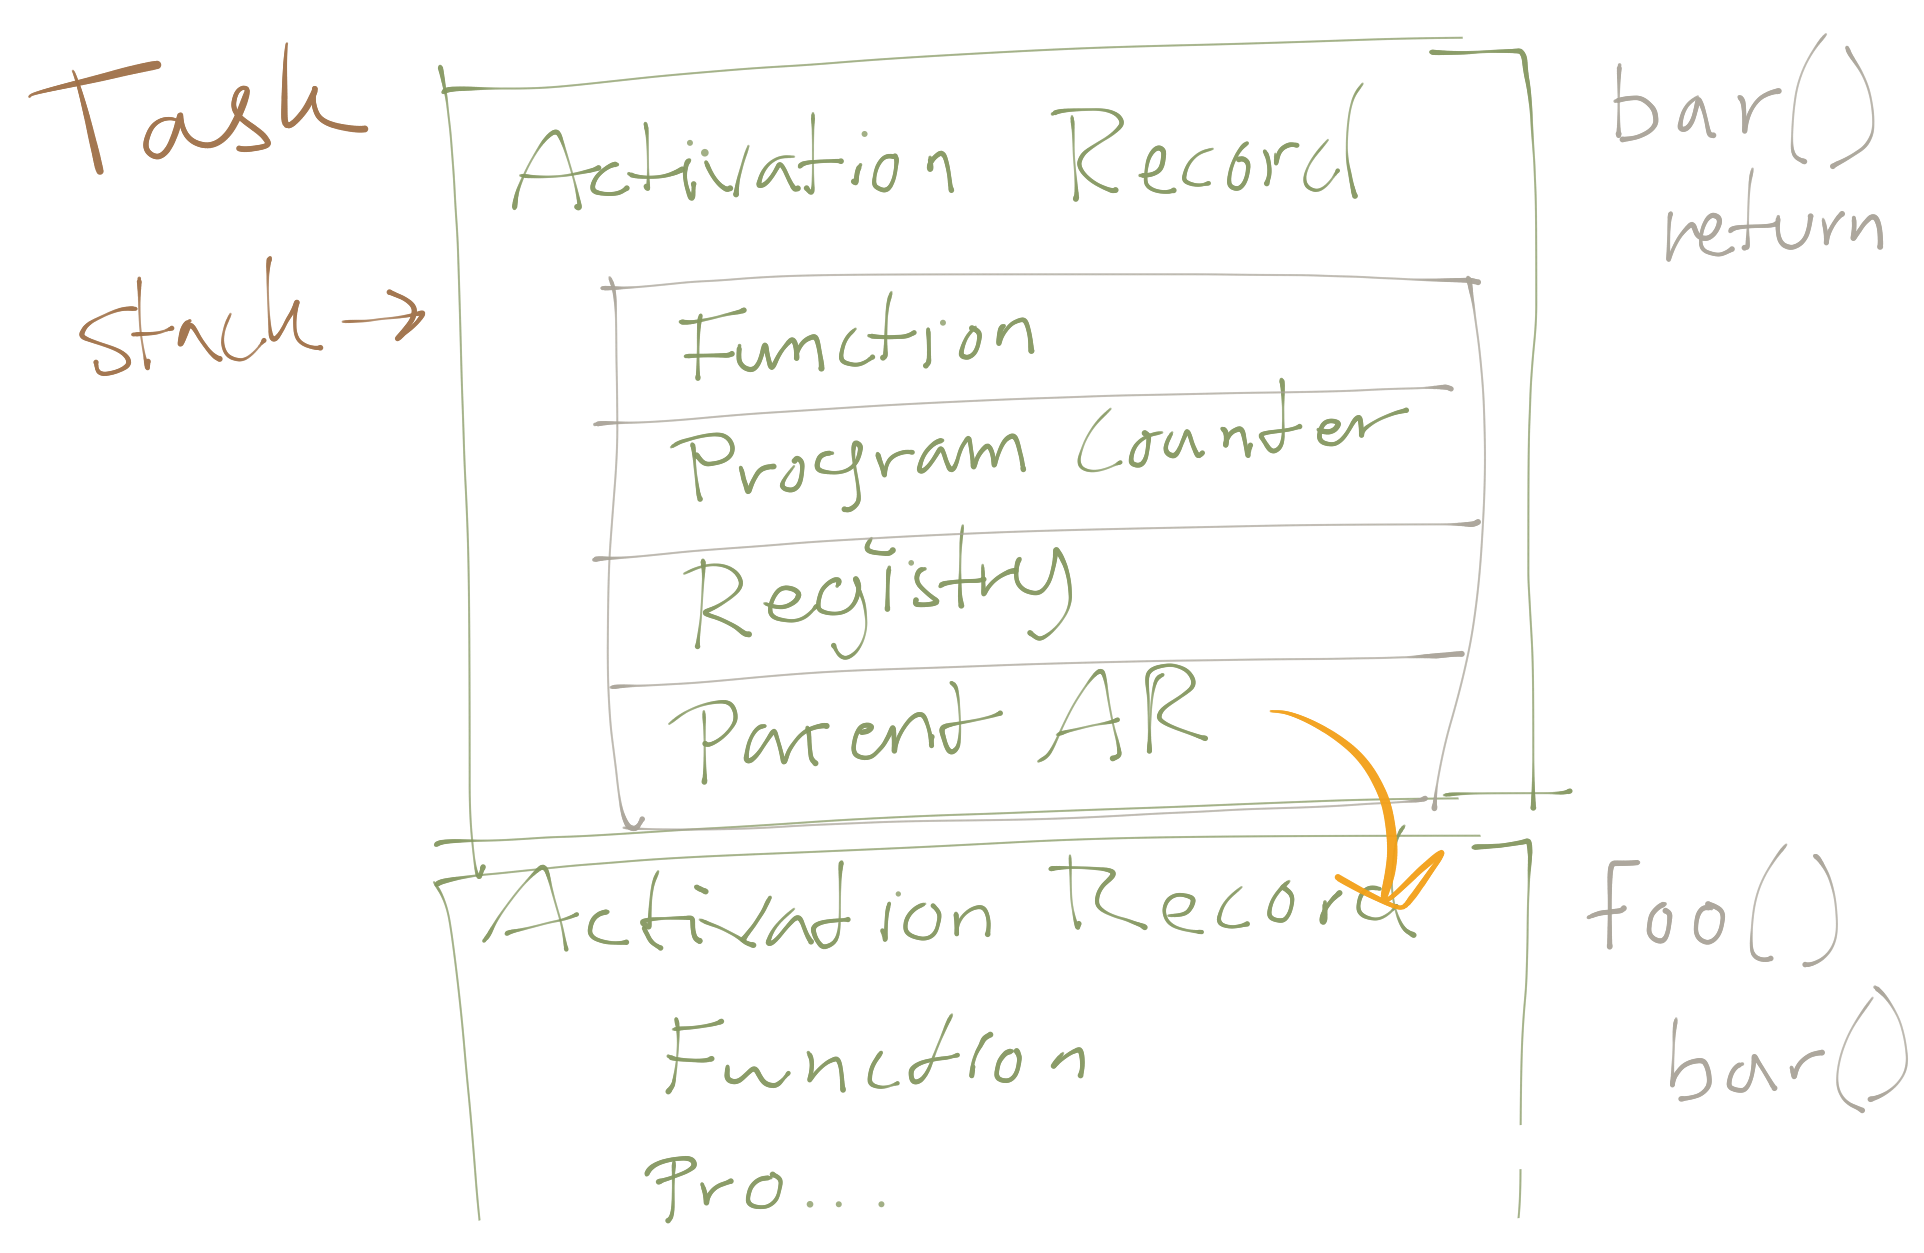 Sketch of a task and its activation records